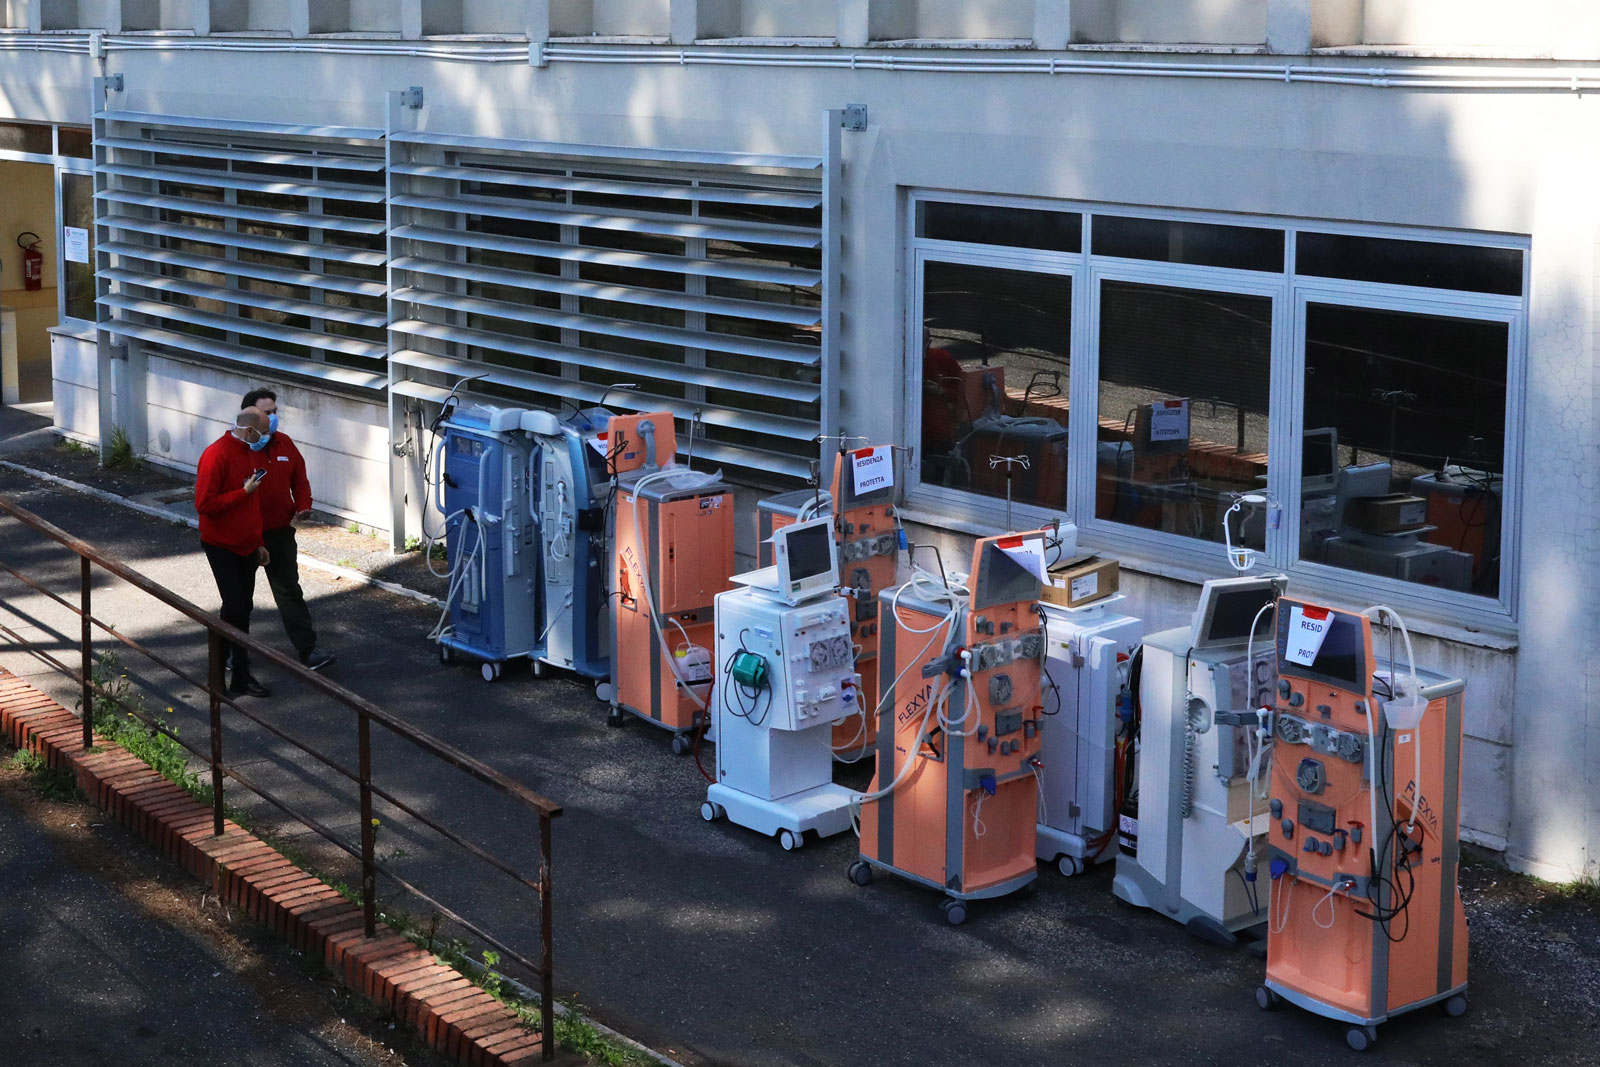 New ventilators arriving at the Columbus Covid2 Hospital, Rome, Italy, March 16, 2020 